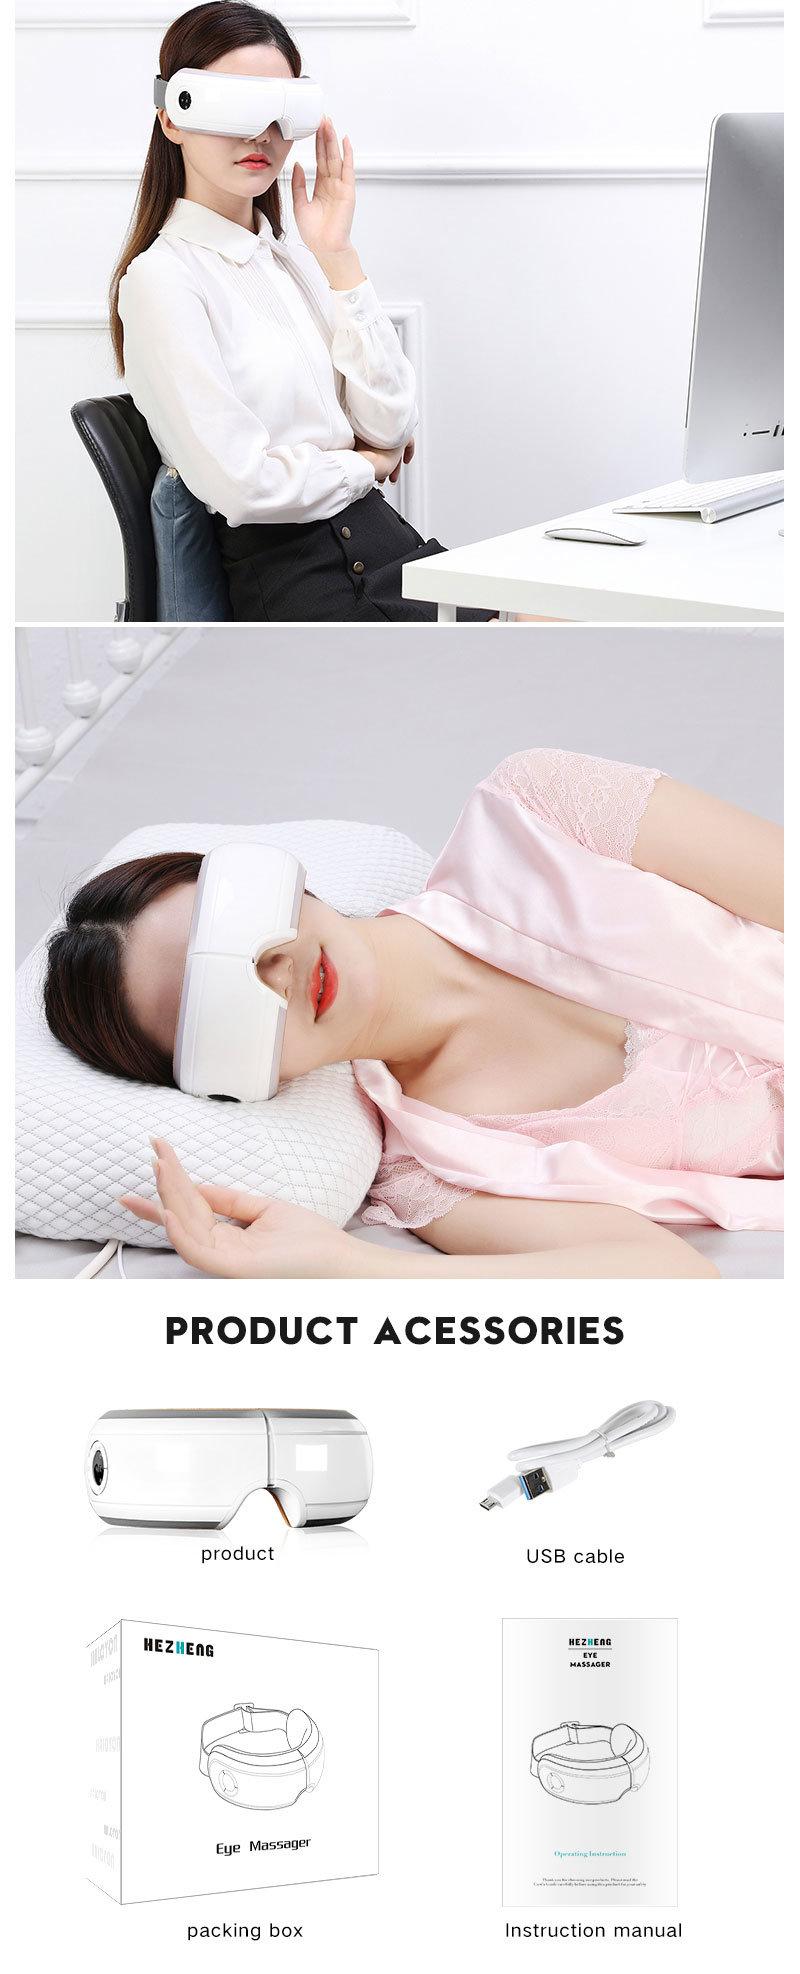 Hezheng New Arrival Bluetooth Electric Vibration Eye Therapy Massager with Hot Compress